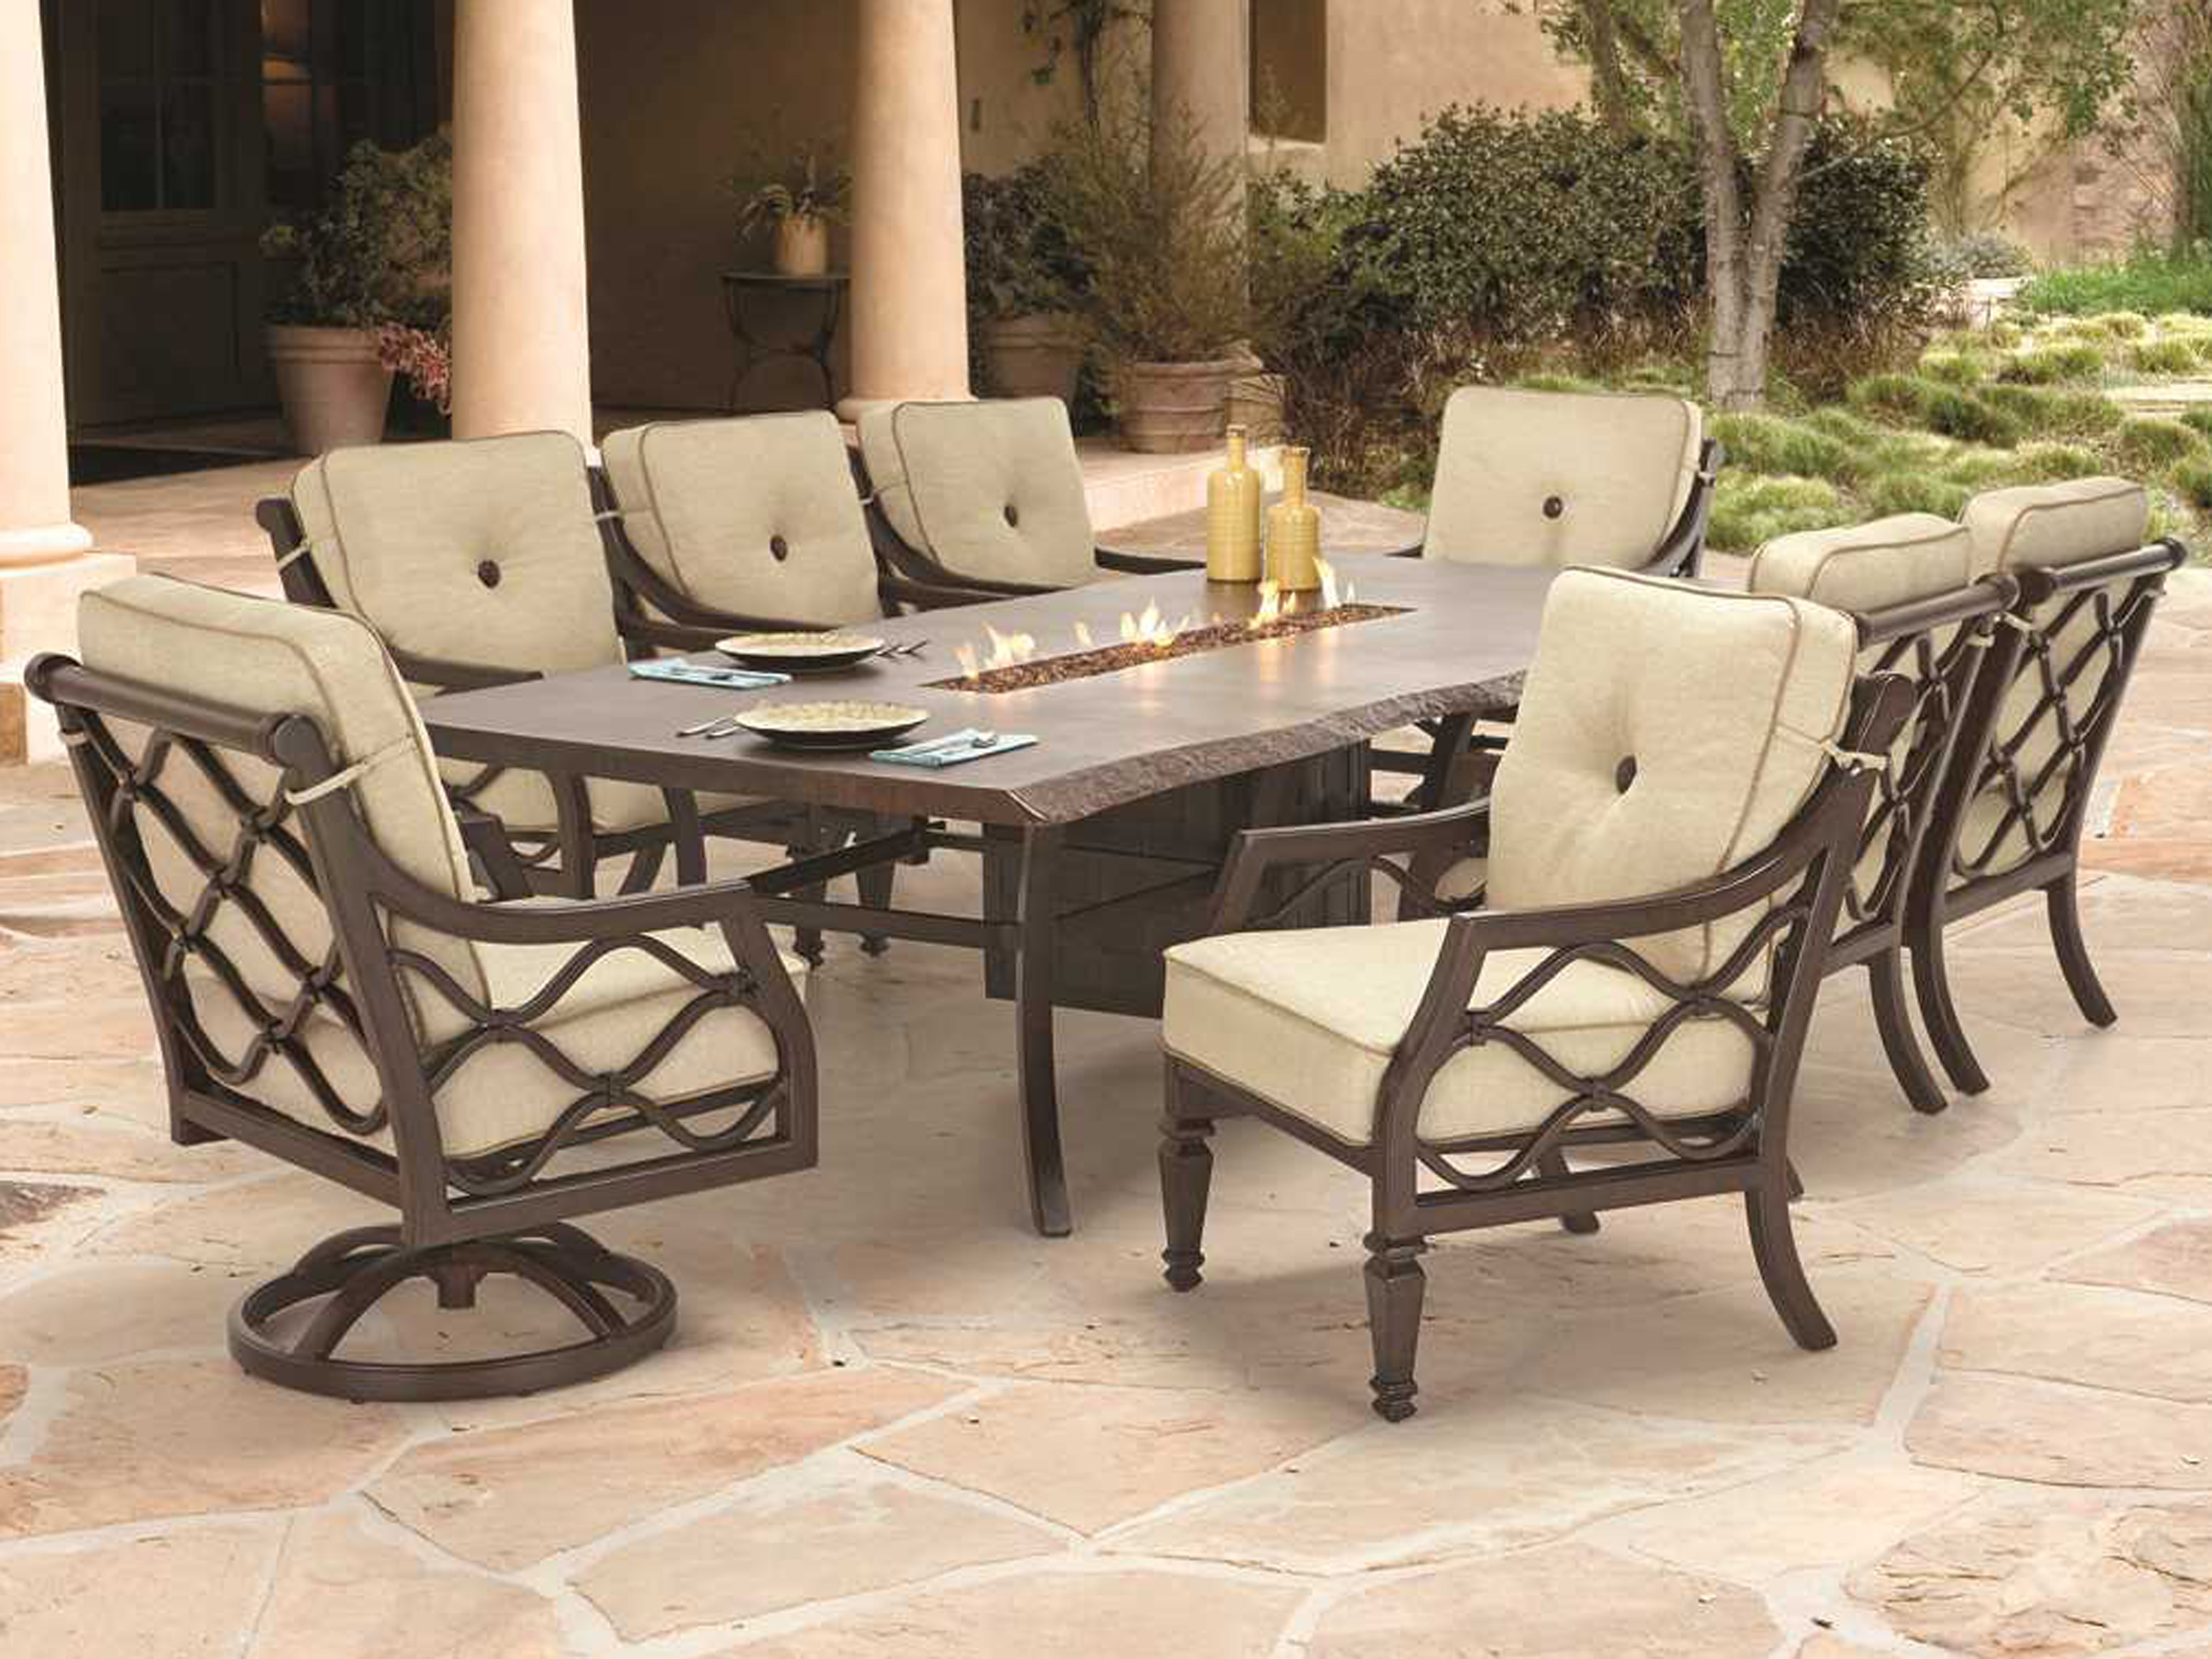 Castelle Villa Bianca Cushion Cast, Patio Dining Set With Fire Pit In The Middle